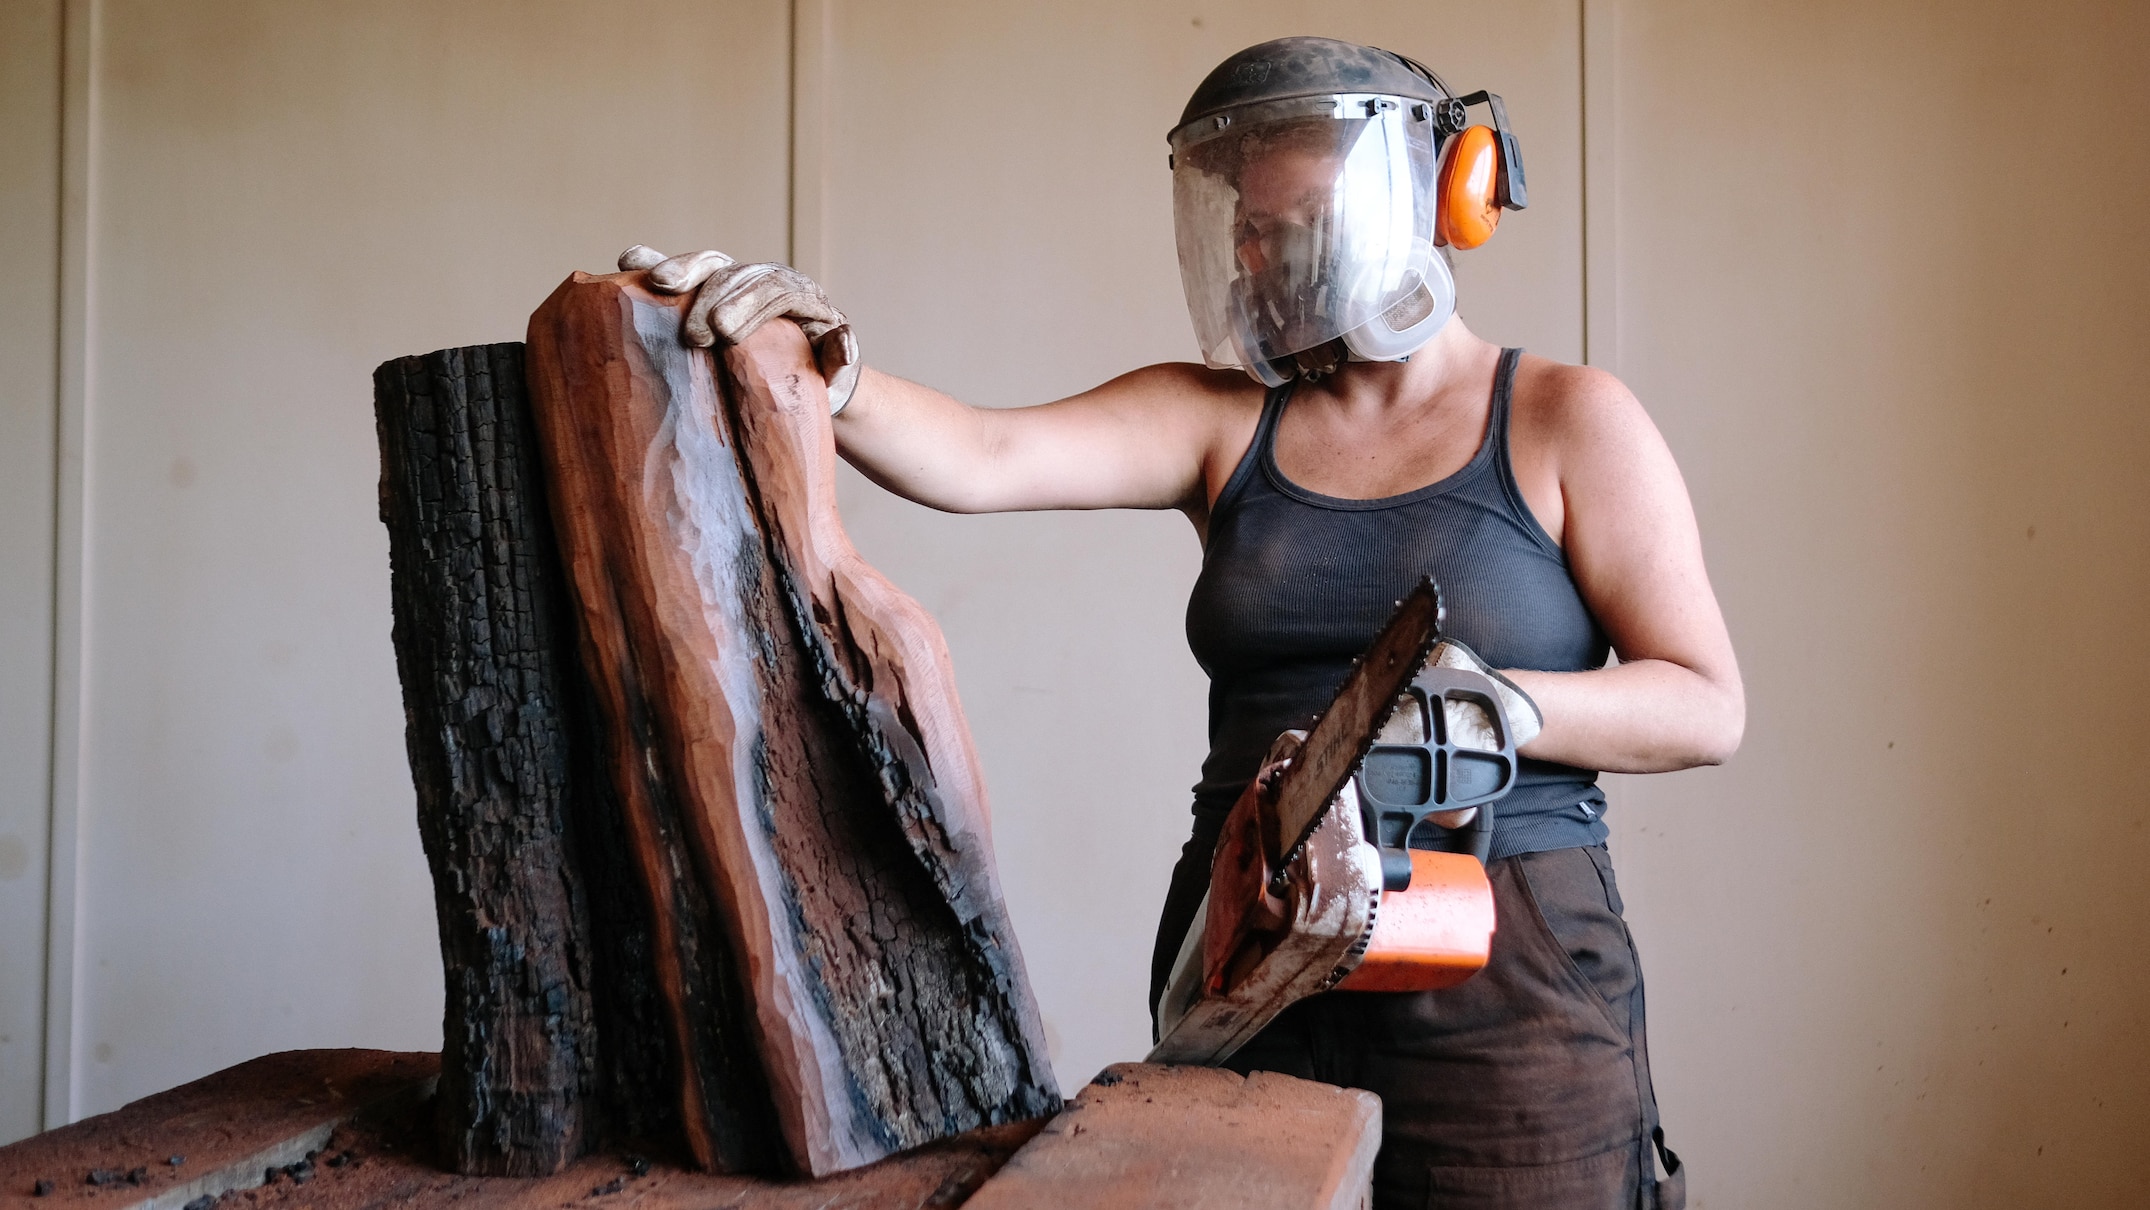 west australian woodworker artist goes against the grain to create remarkable, feminine forms